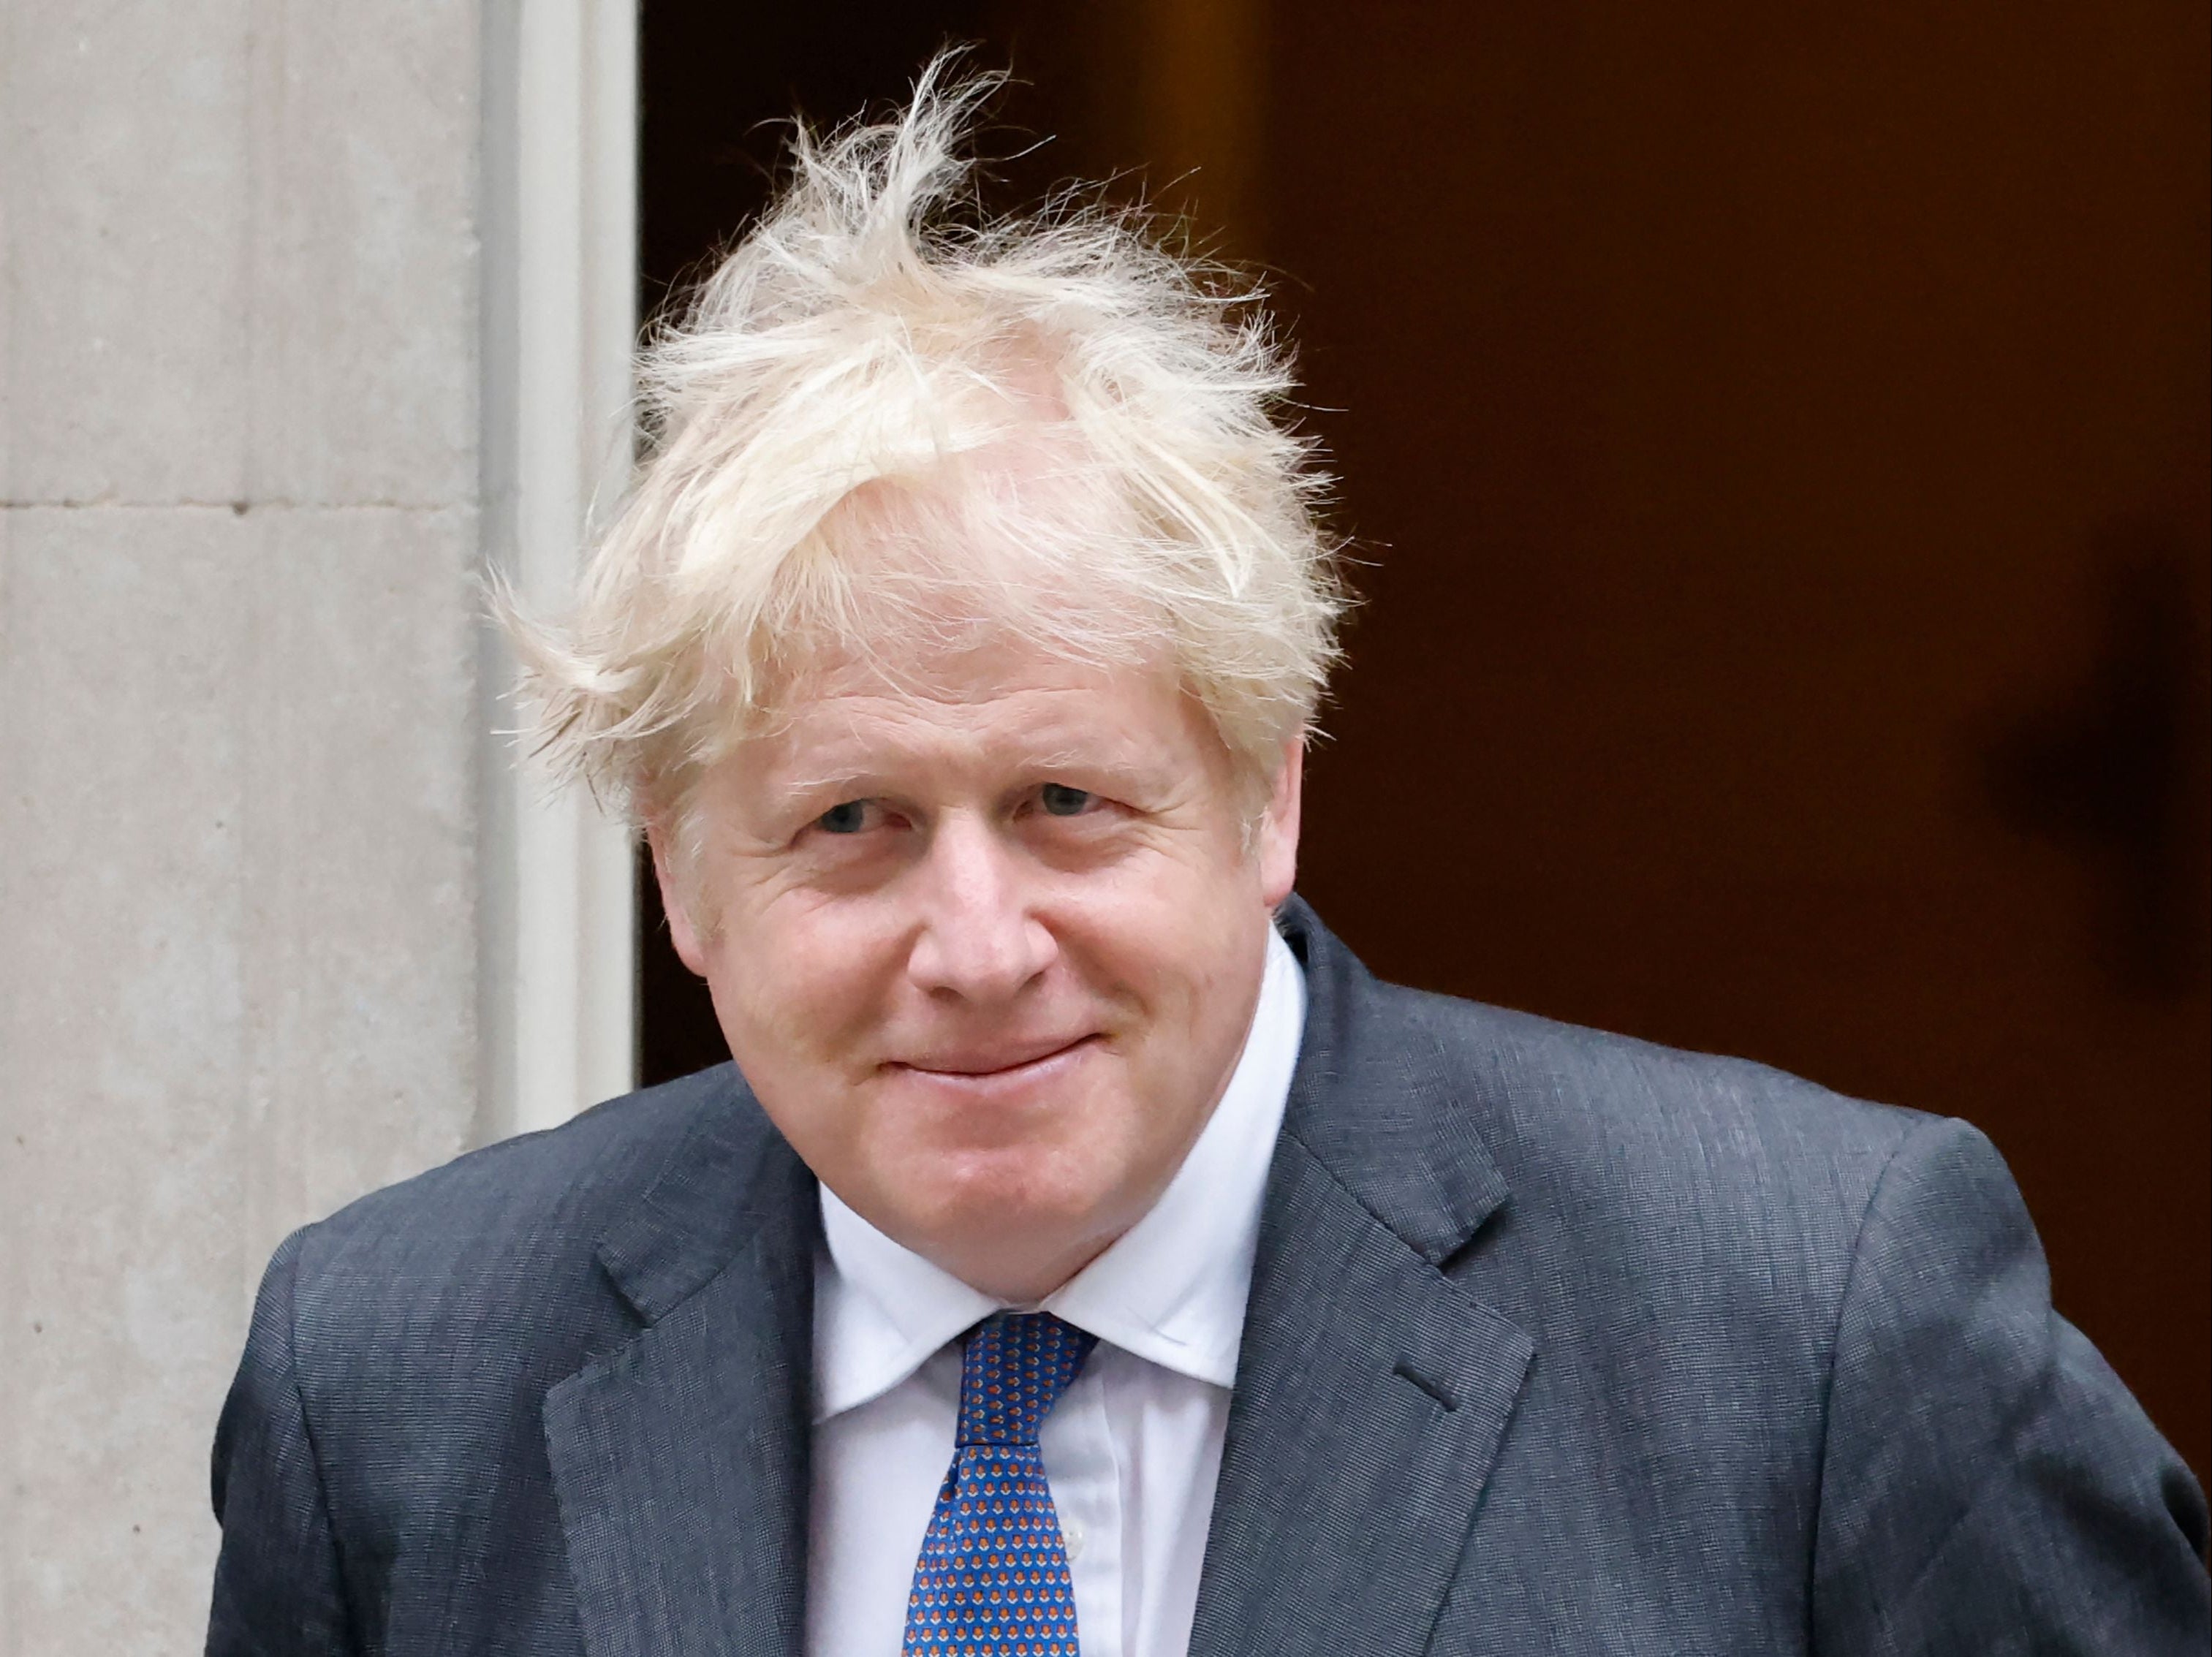 Boris Johnson won’t say if he’s used private email for government business